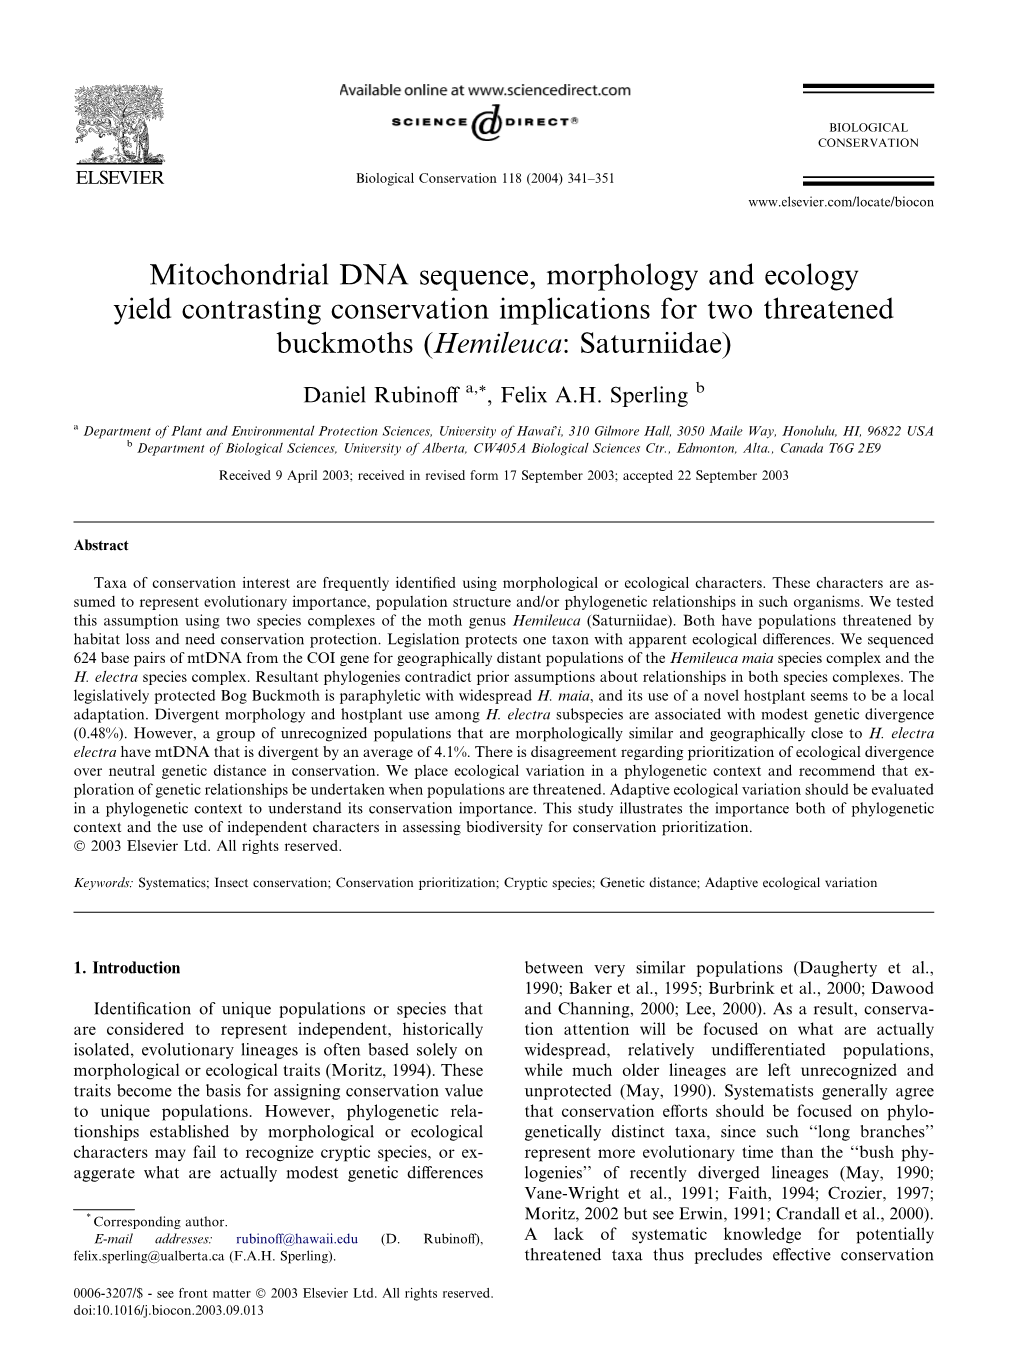 Mitochondrial DNA Sequence, Morphology and Ecology Yield Contrasting Conservation Implications for Two Threatened Buckmoths (Hemileuca: Saturniidae)